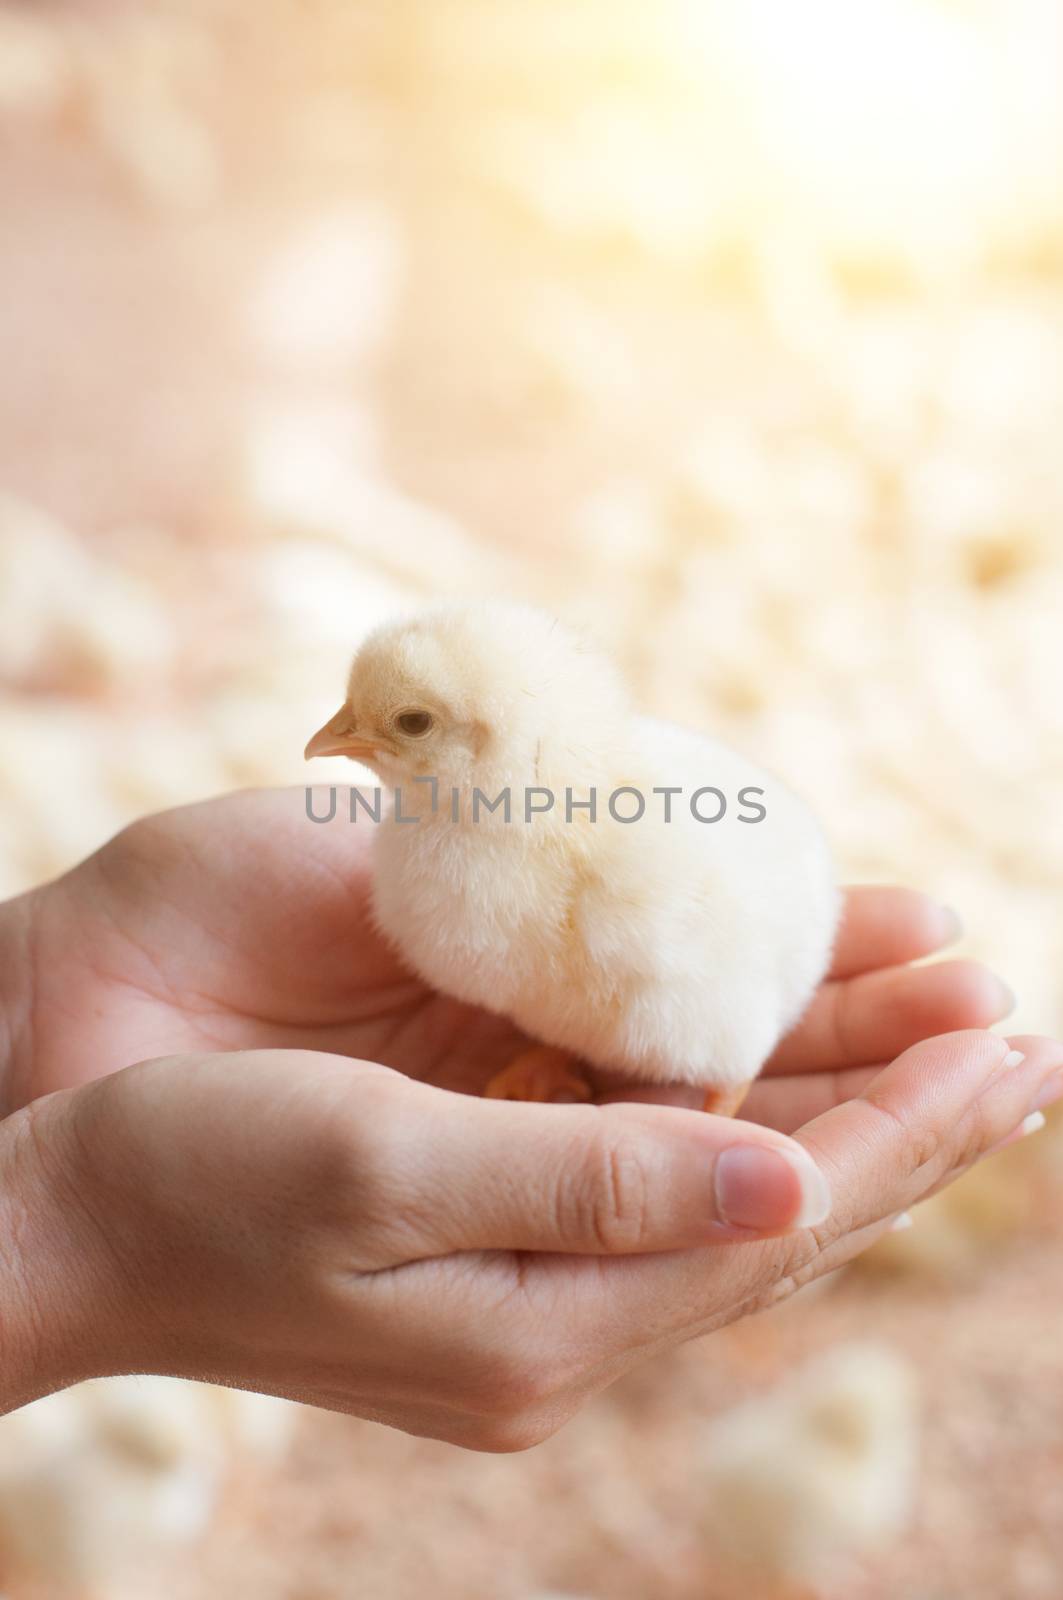 Baby chick in hand by szefei